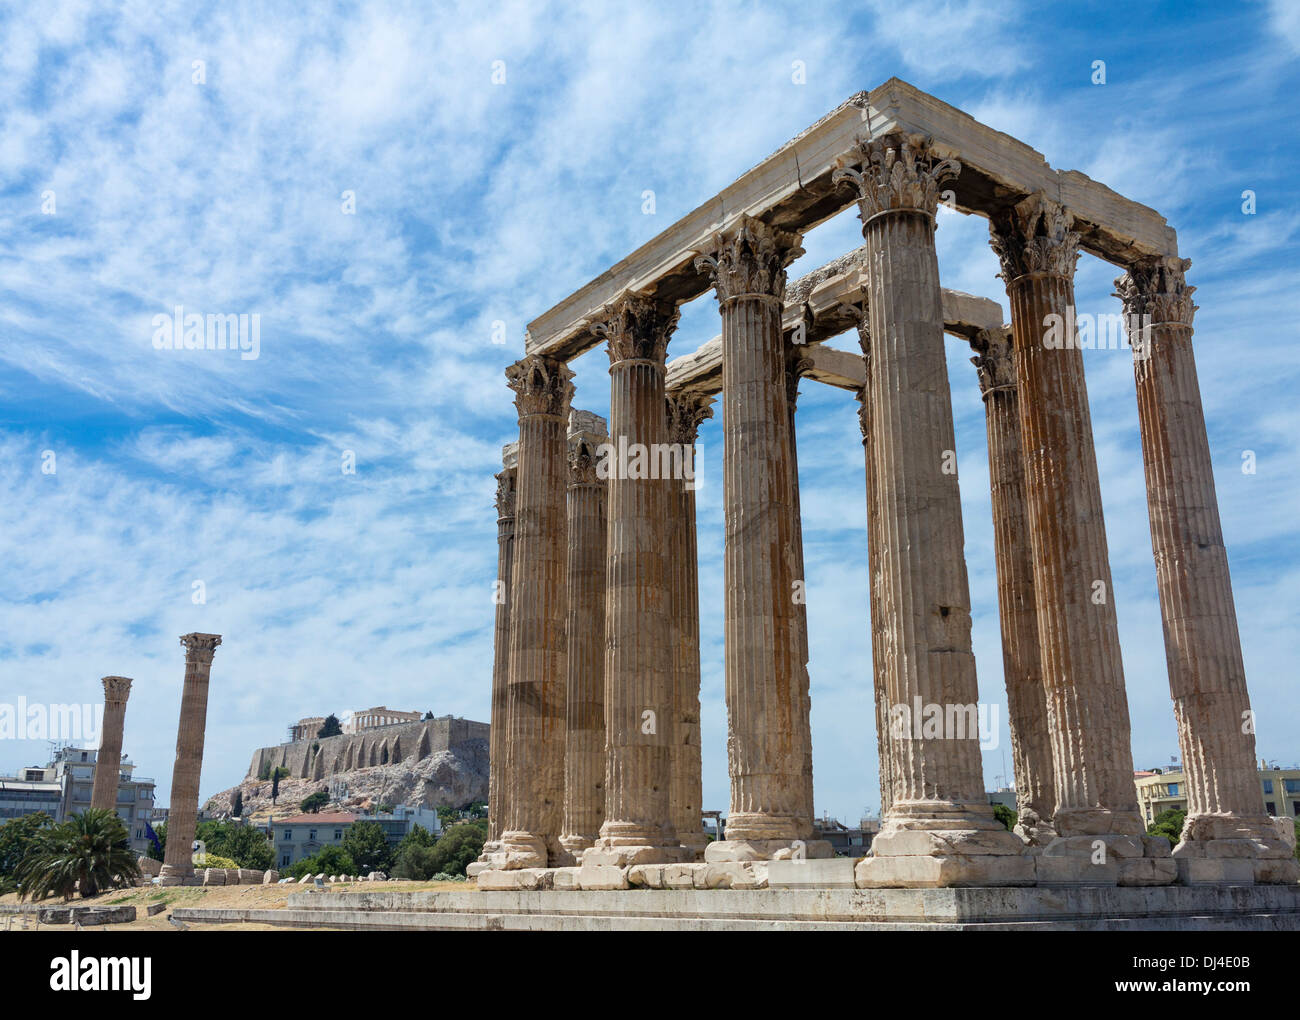 Ancient Greece - The Temple of Olympian Zeus / Olympieion, Athens, Greece - with the Acropolis behind Stock Photo